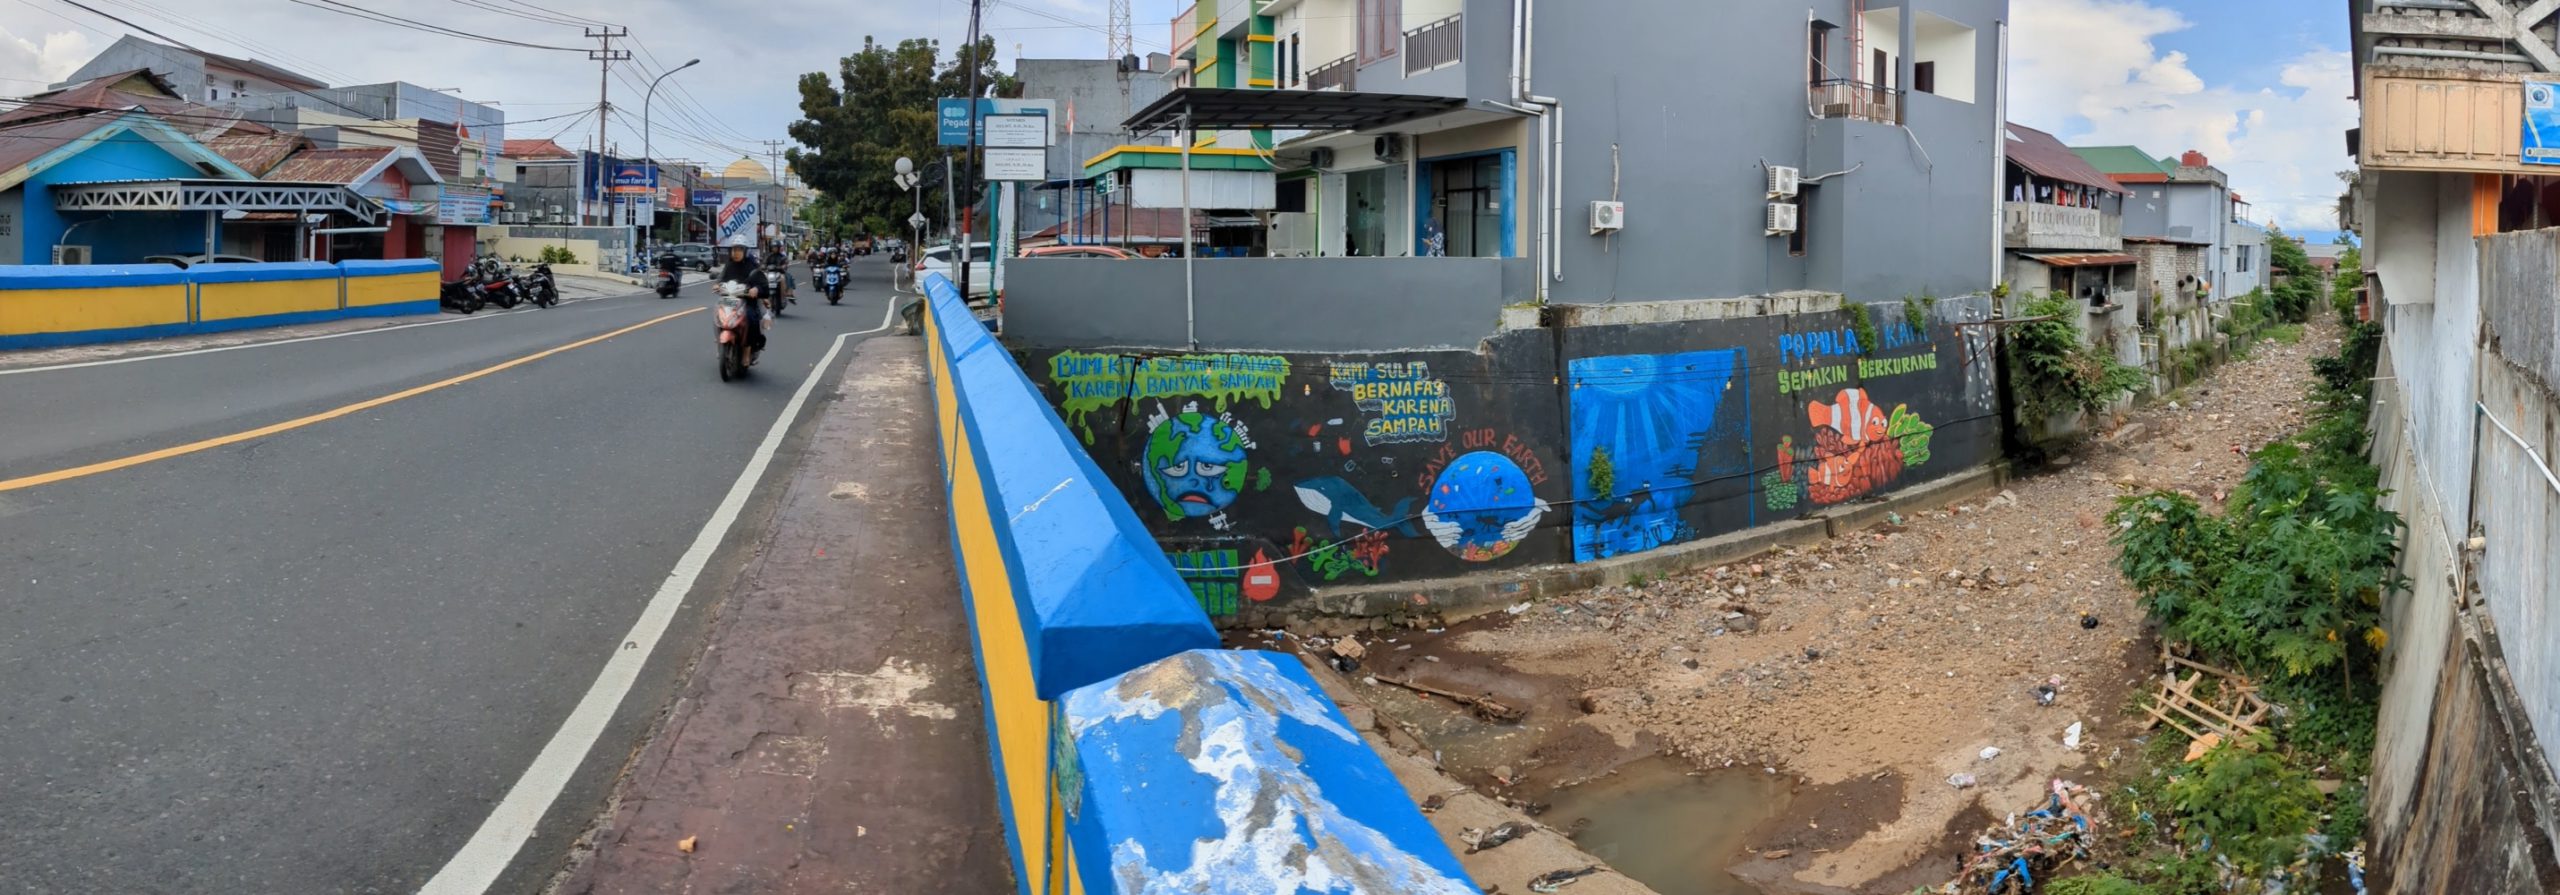 A view of the canal mural, showing an unhappy sweating Earth, a whale swimming in garbage, and hands holding an ocean setting with the words "Save our Earth", followed by a scene of scuba divers exploring a reef and two clownfish in a reef. Steep stairs to the left lead from the canal up to street level, and a bridge over the canal is further to the left. Random bits of garbage litter the canal.